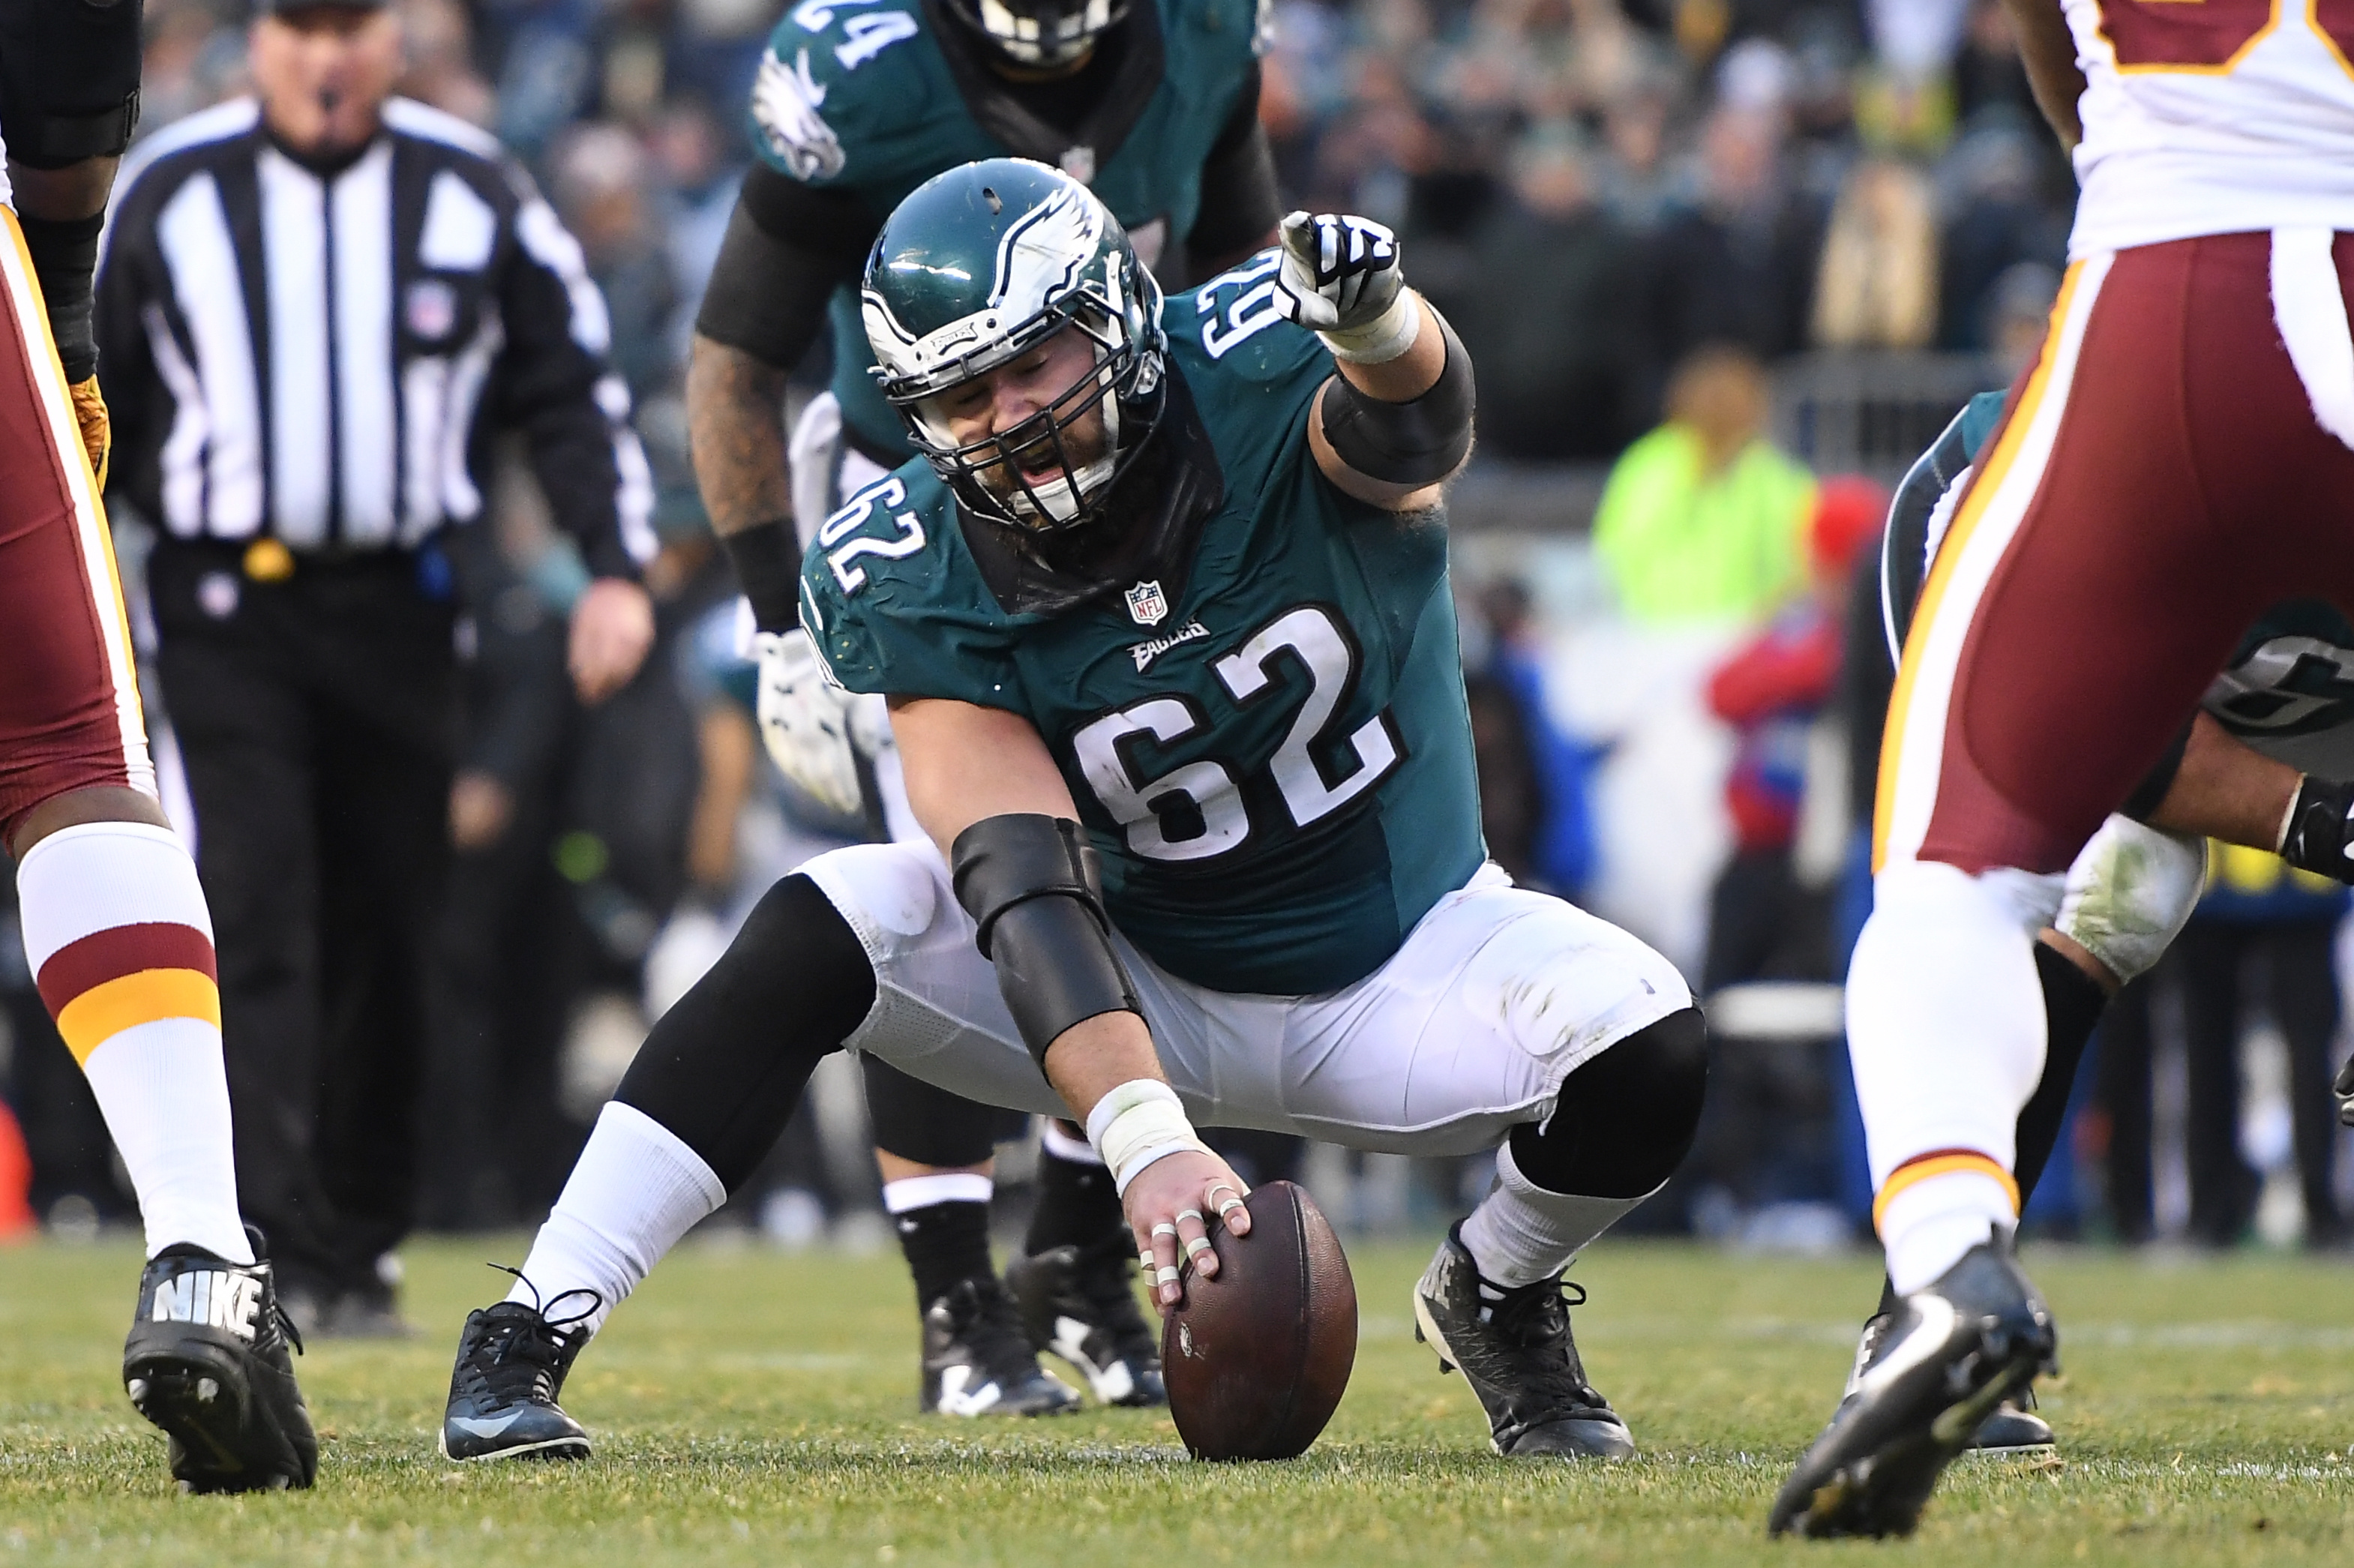 Jason Kelce pointing out an opposing player during a game